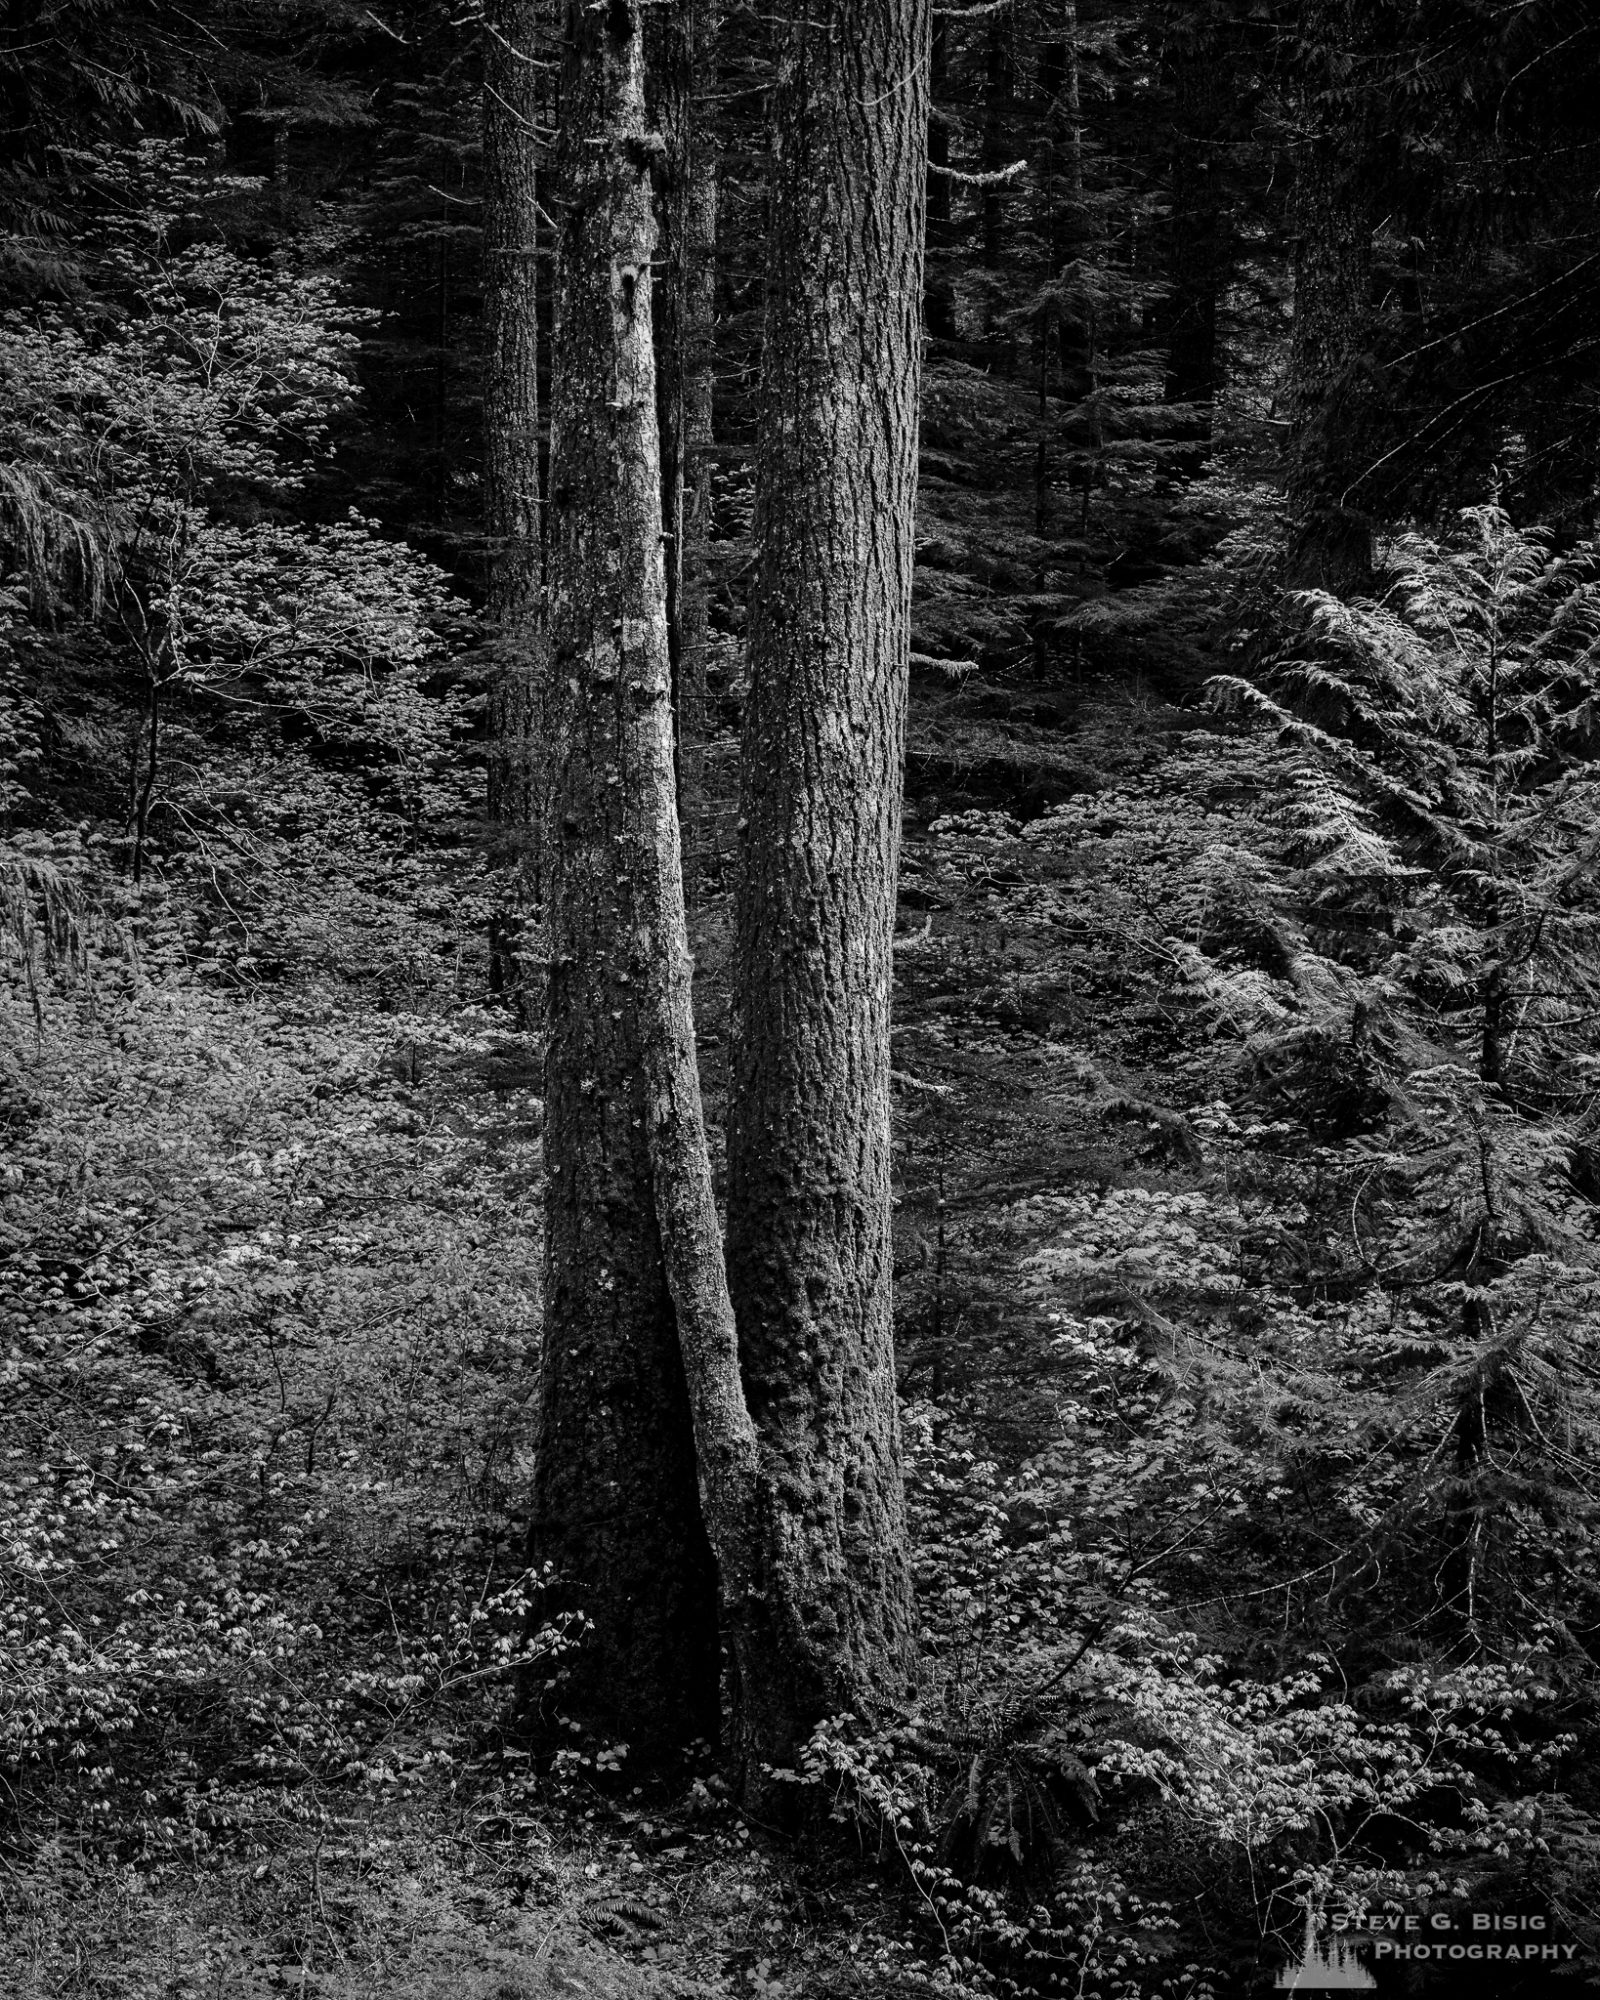 A black and white landscape photograph of the forest along Forest Road 52 (Skate Creek Road) in the Gifford Pinchot National Forest, Washington.